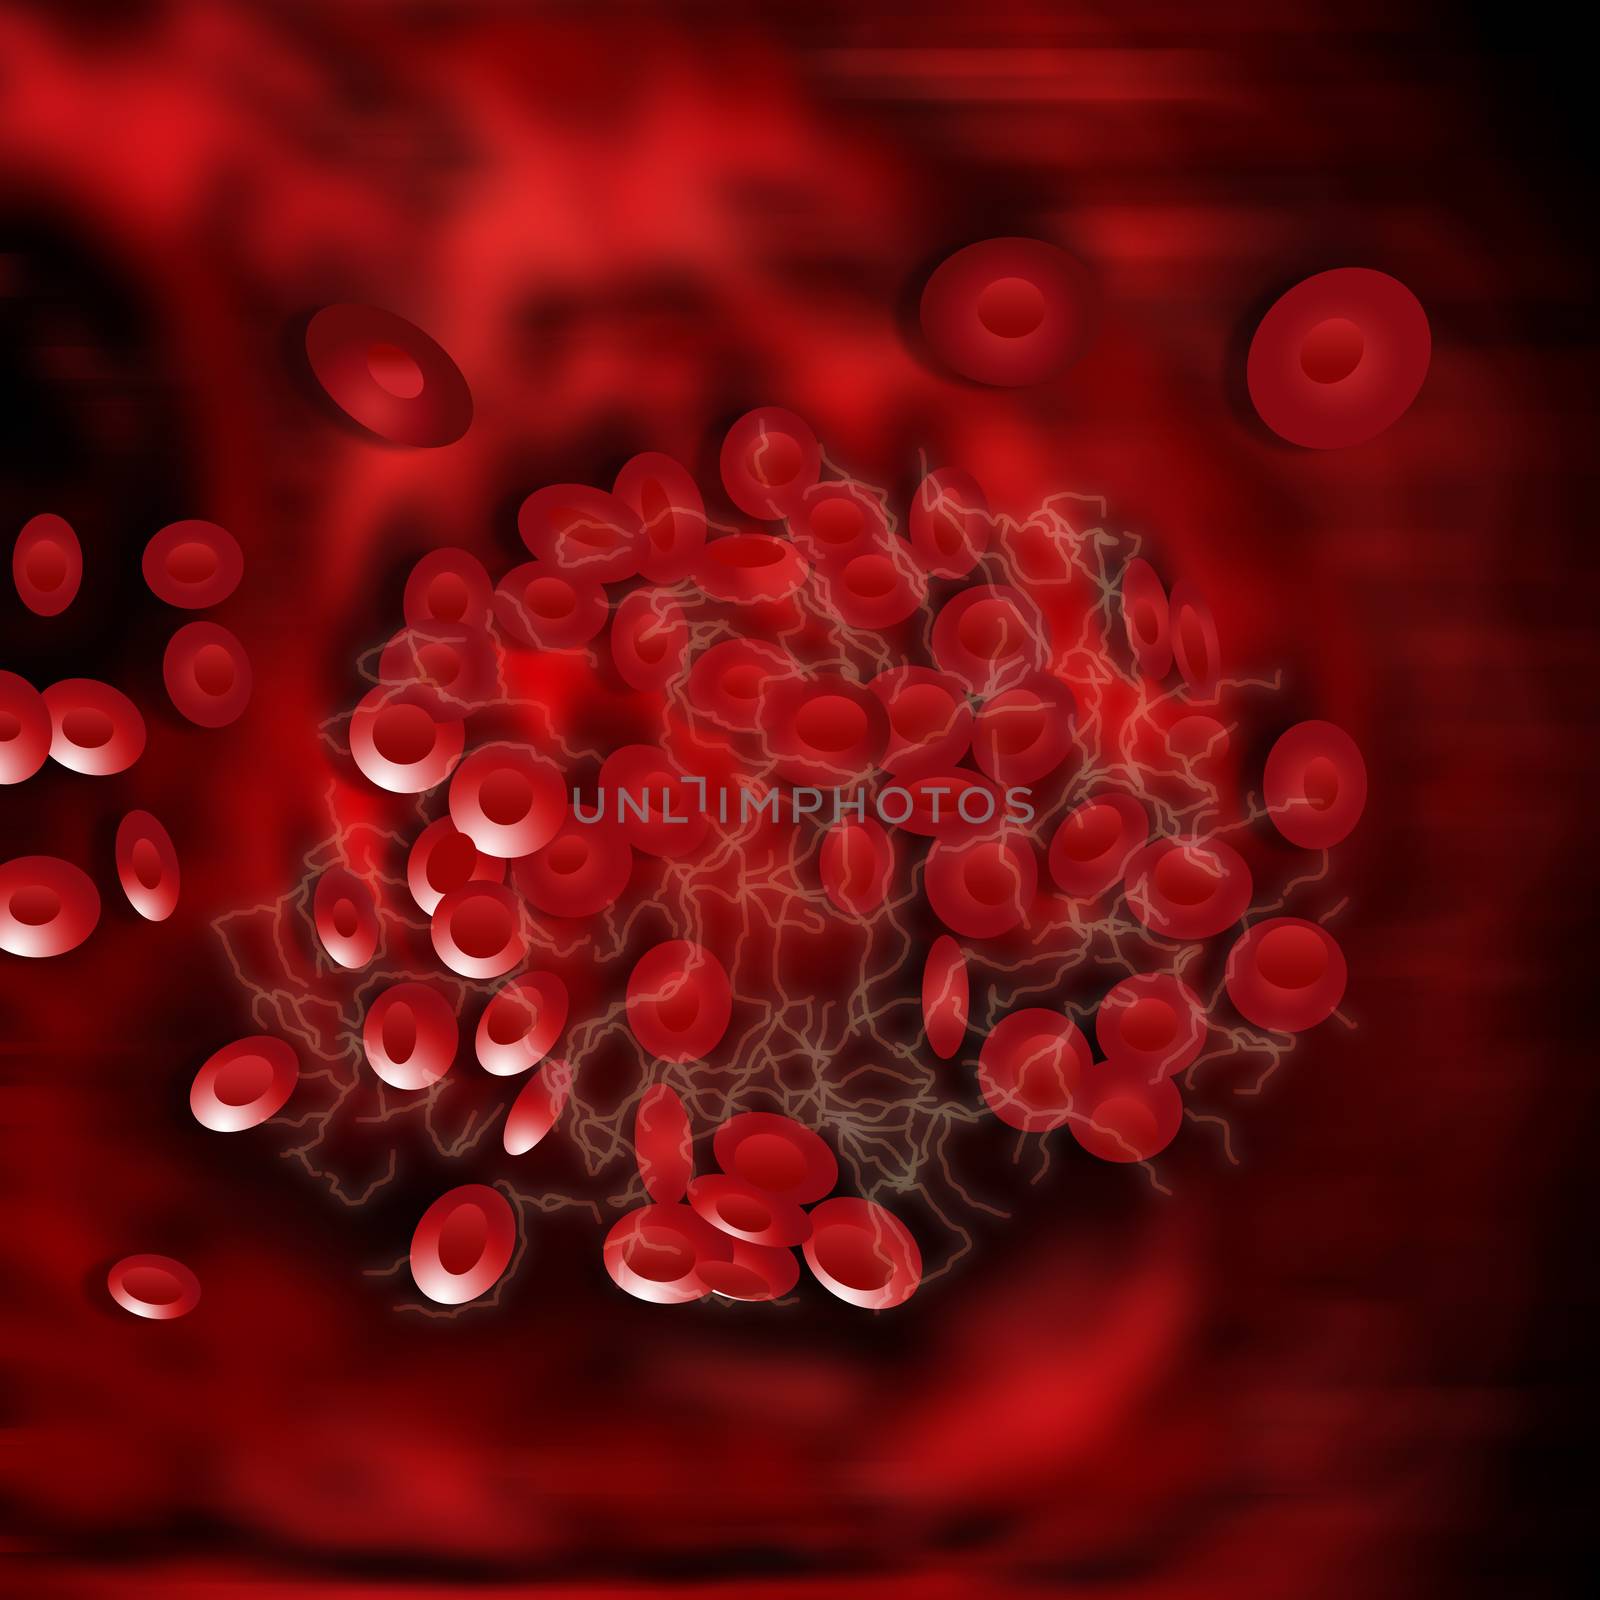 Illustration of Blood Clot. Red blood cells are red and fibrin protein strands are off-white in color.